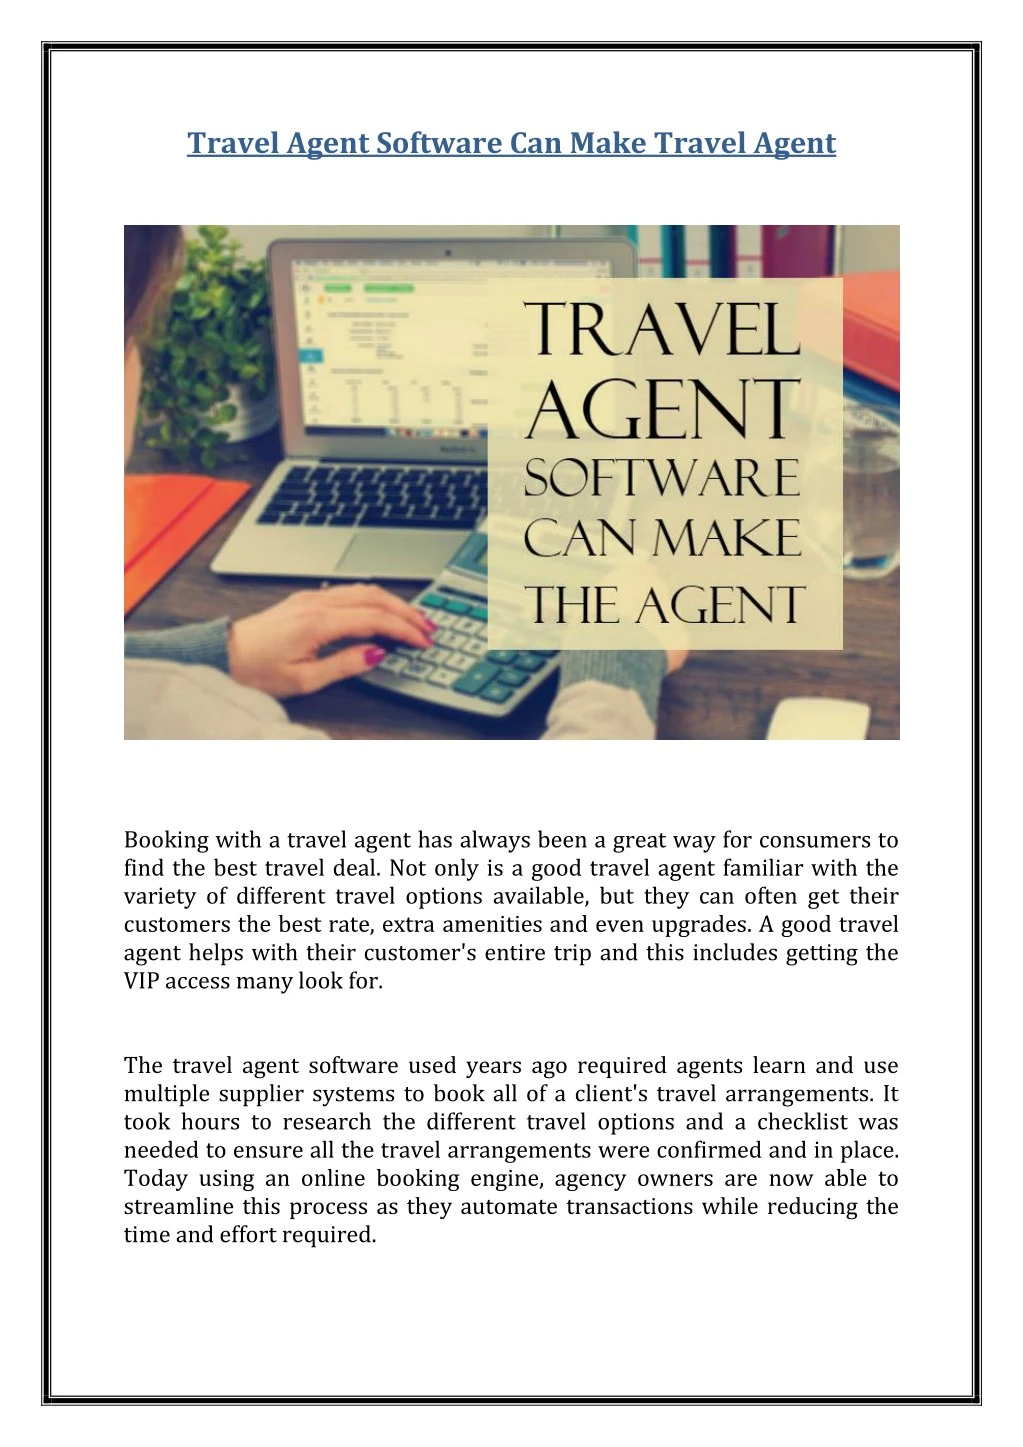 travel agent software can make travel agent